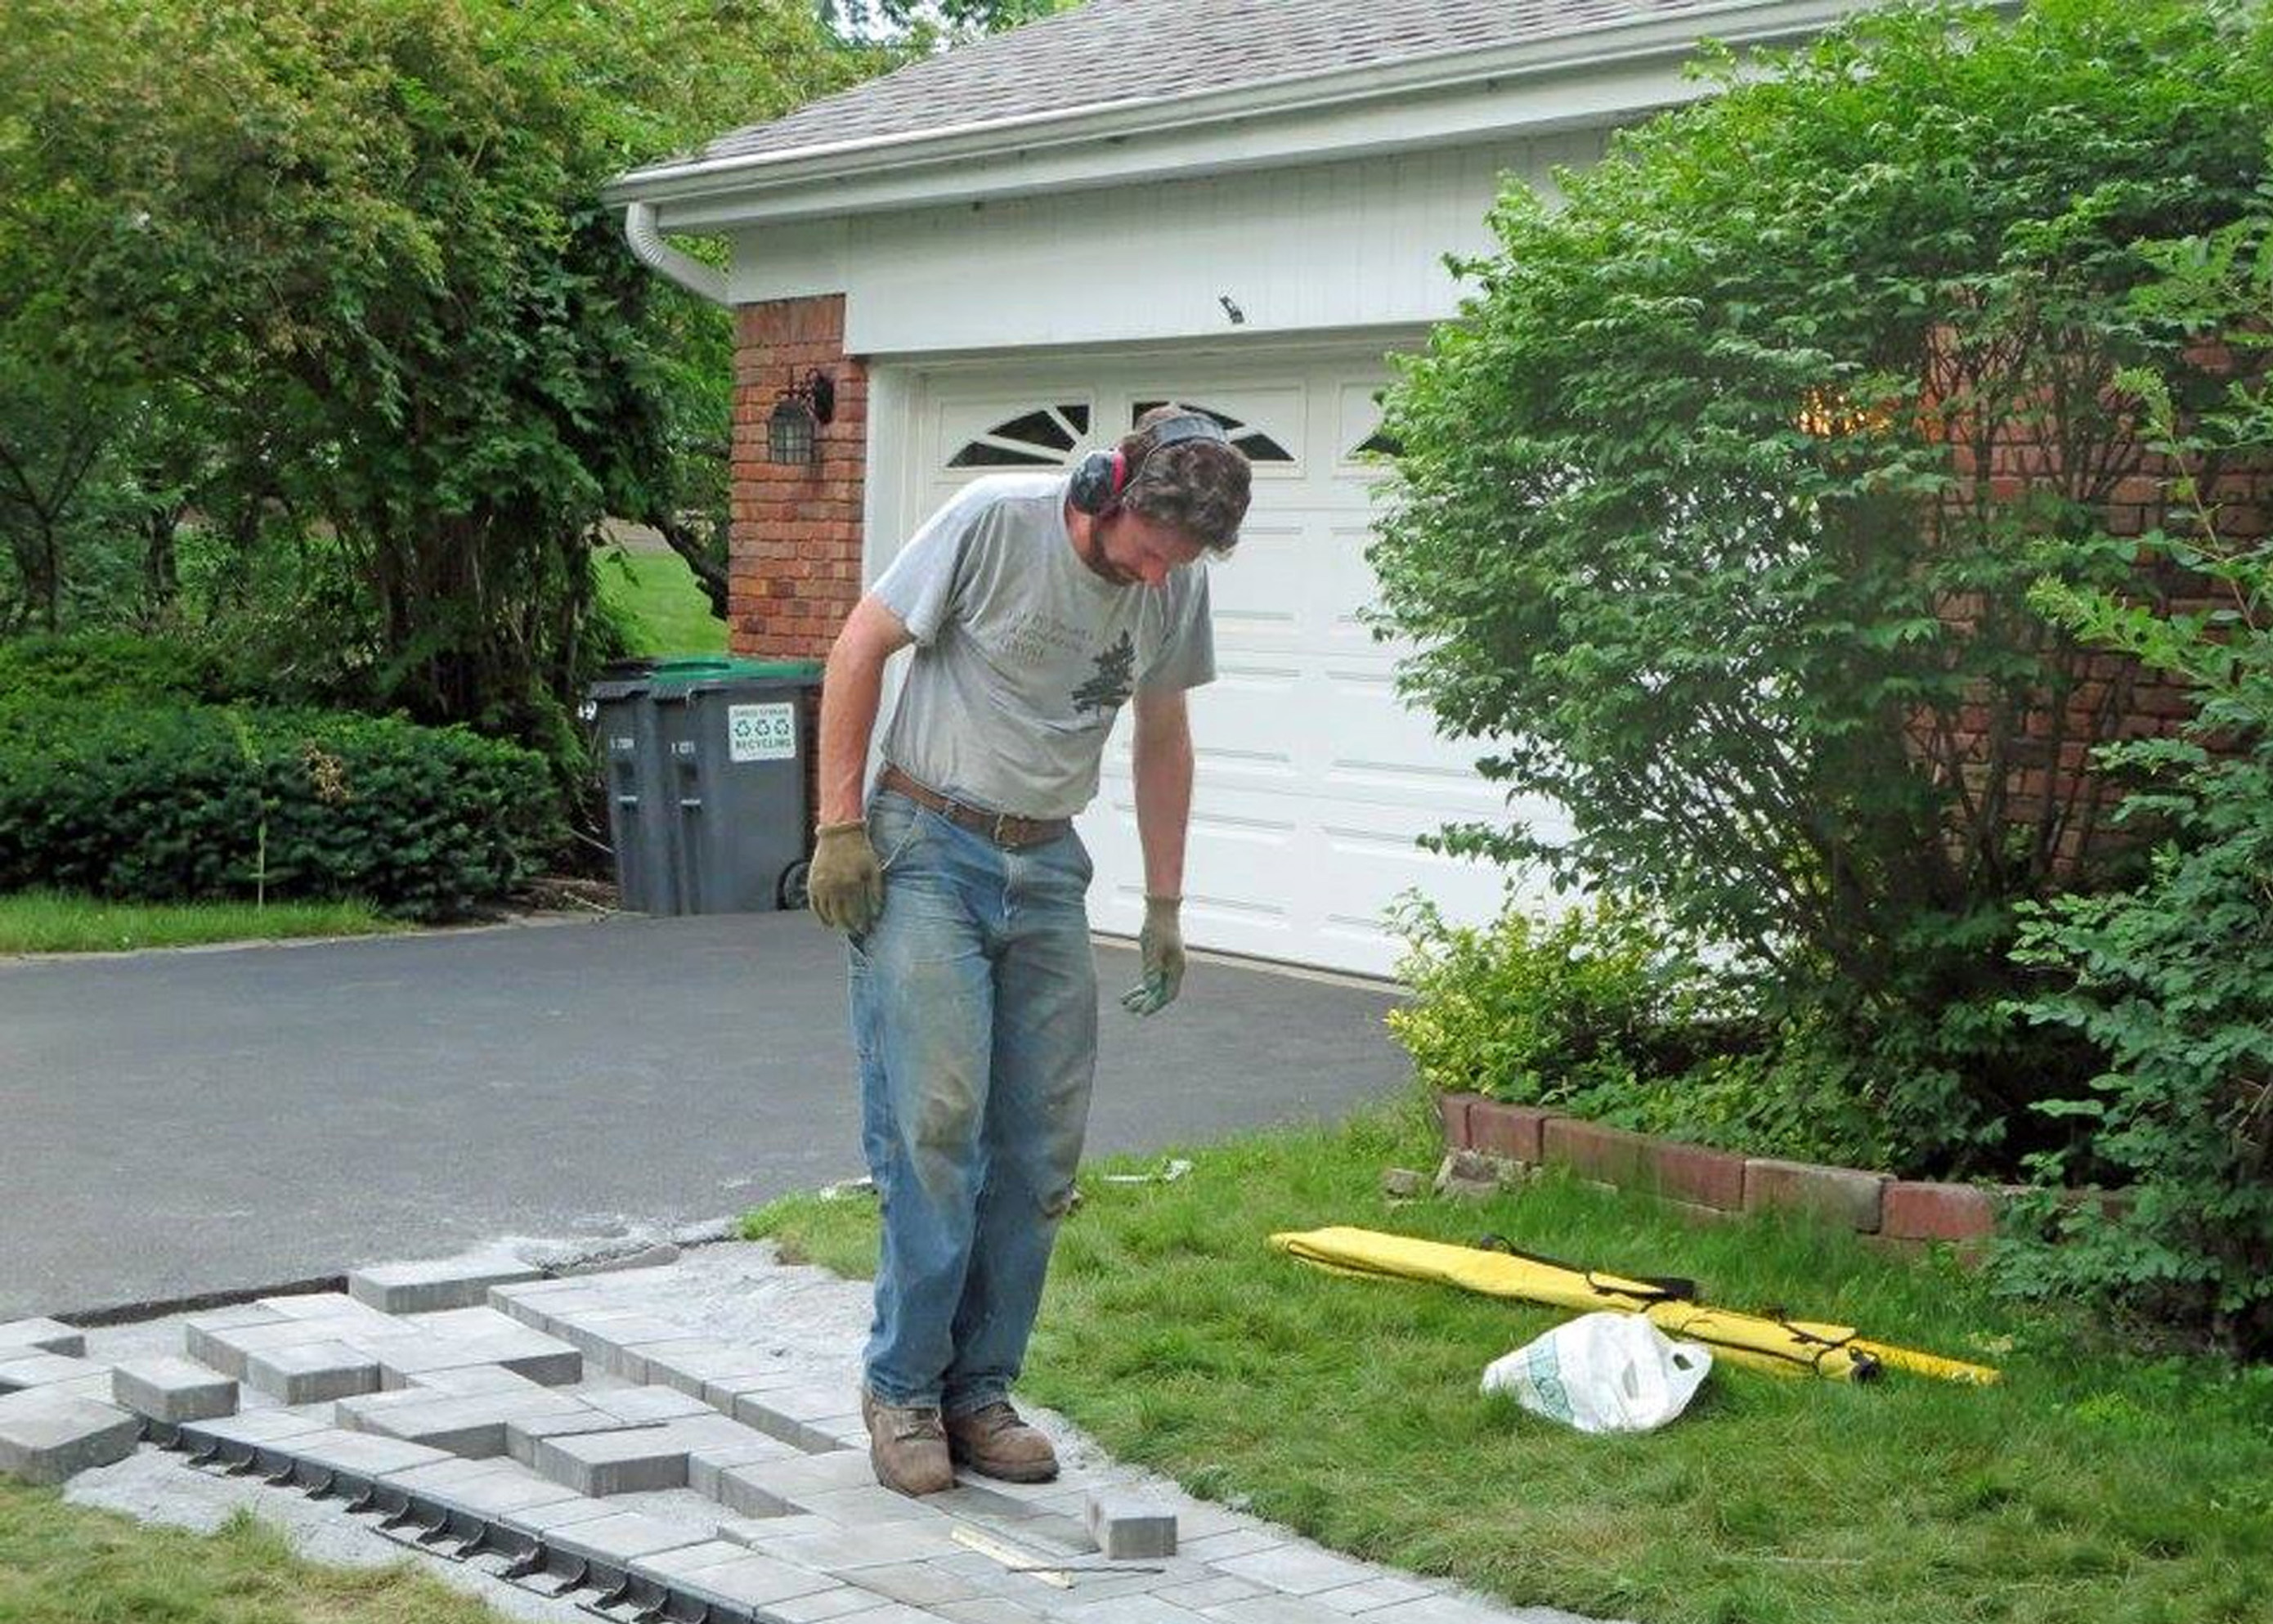 Installation of stone sidewalk in front of house